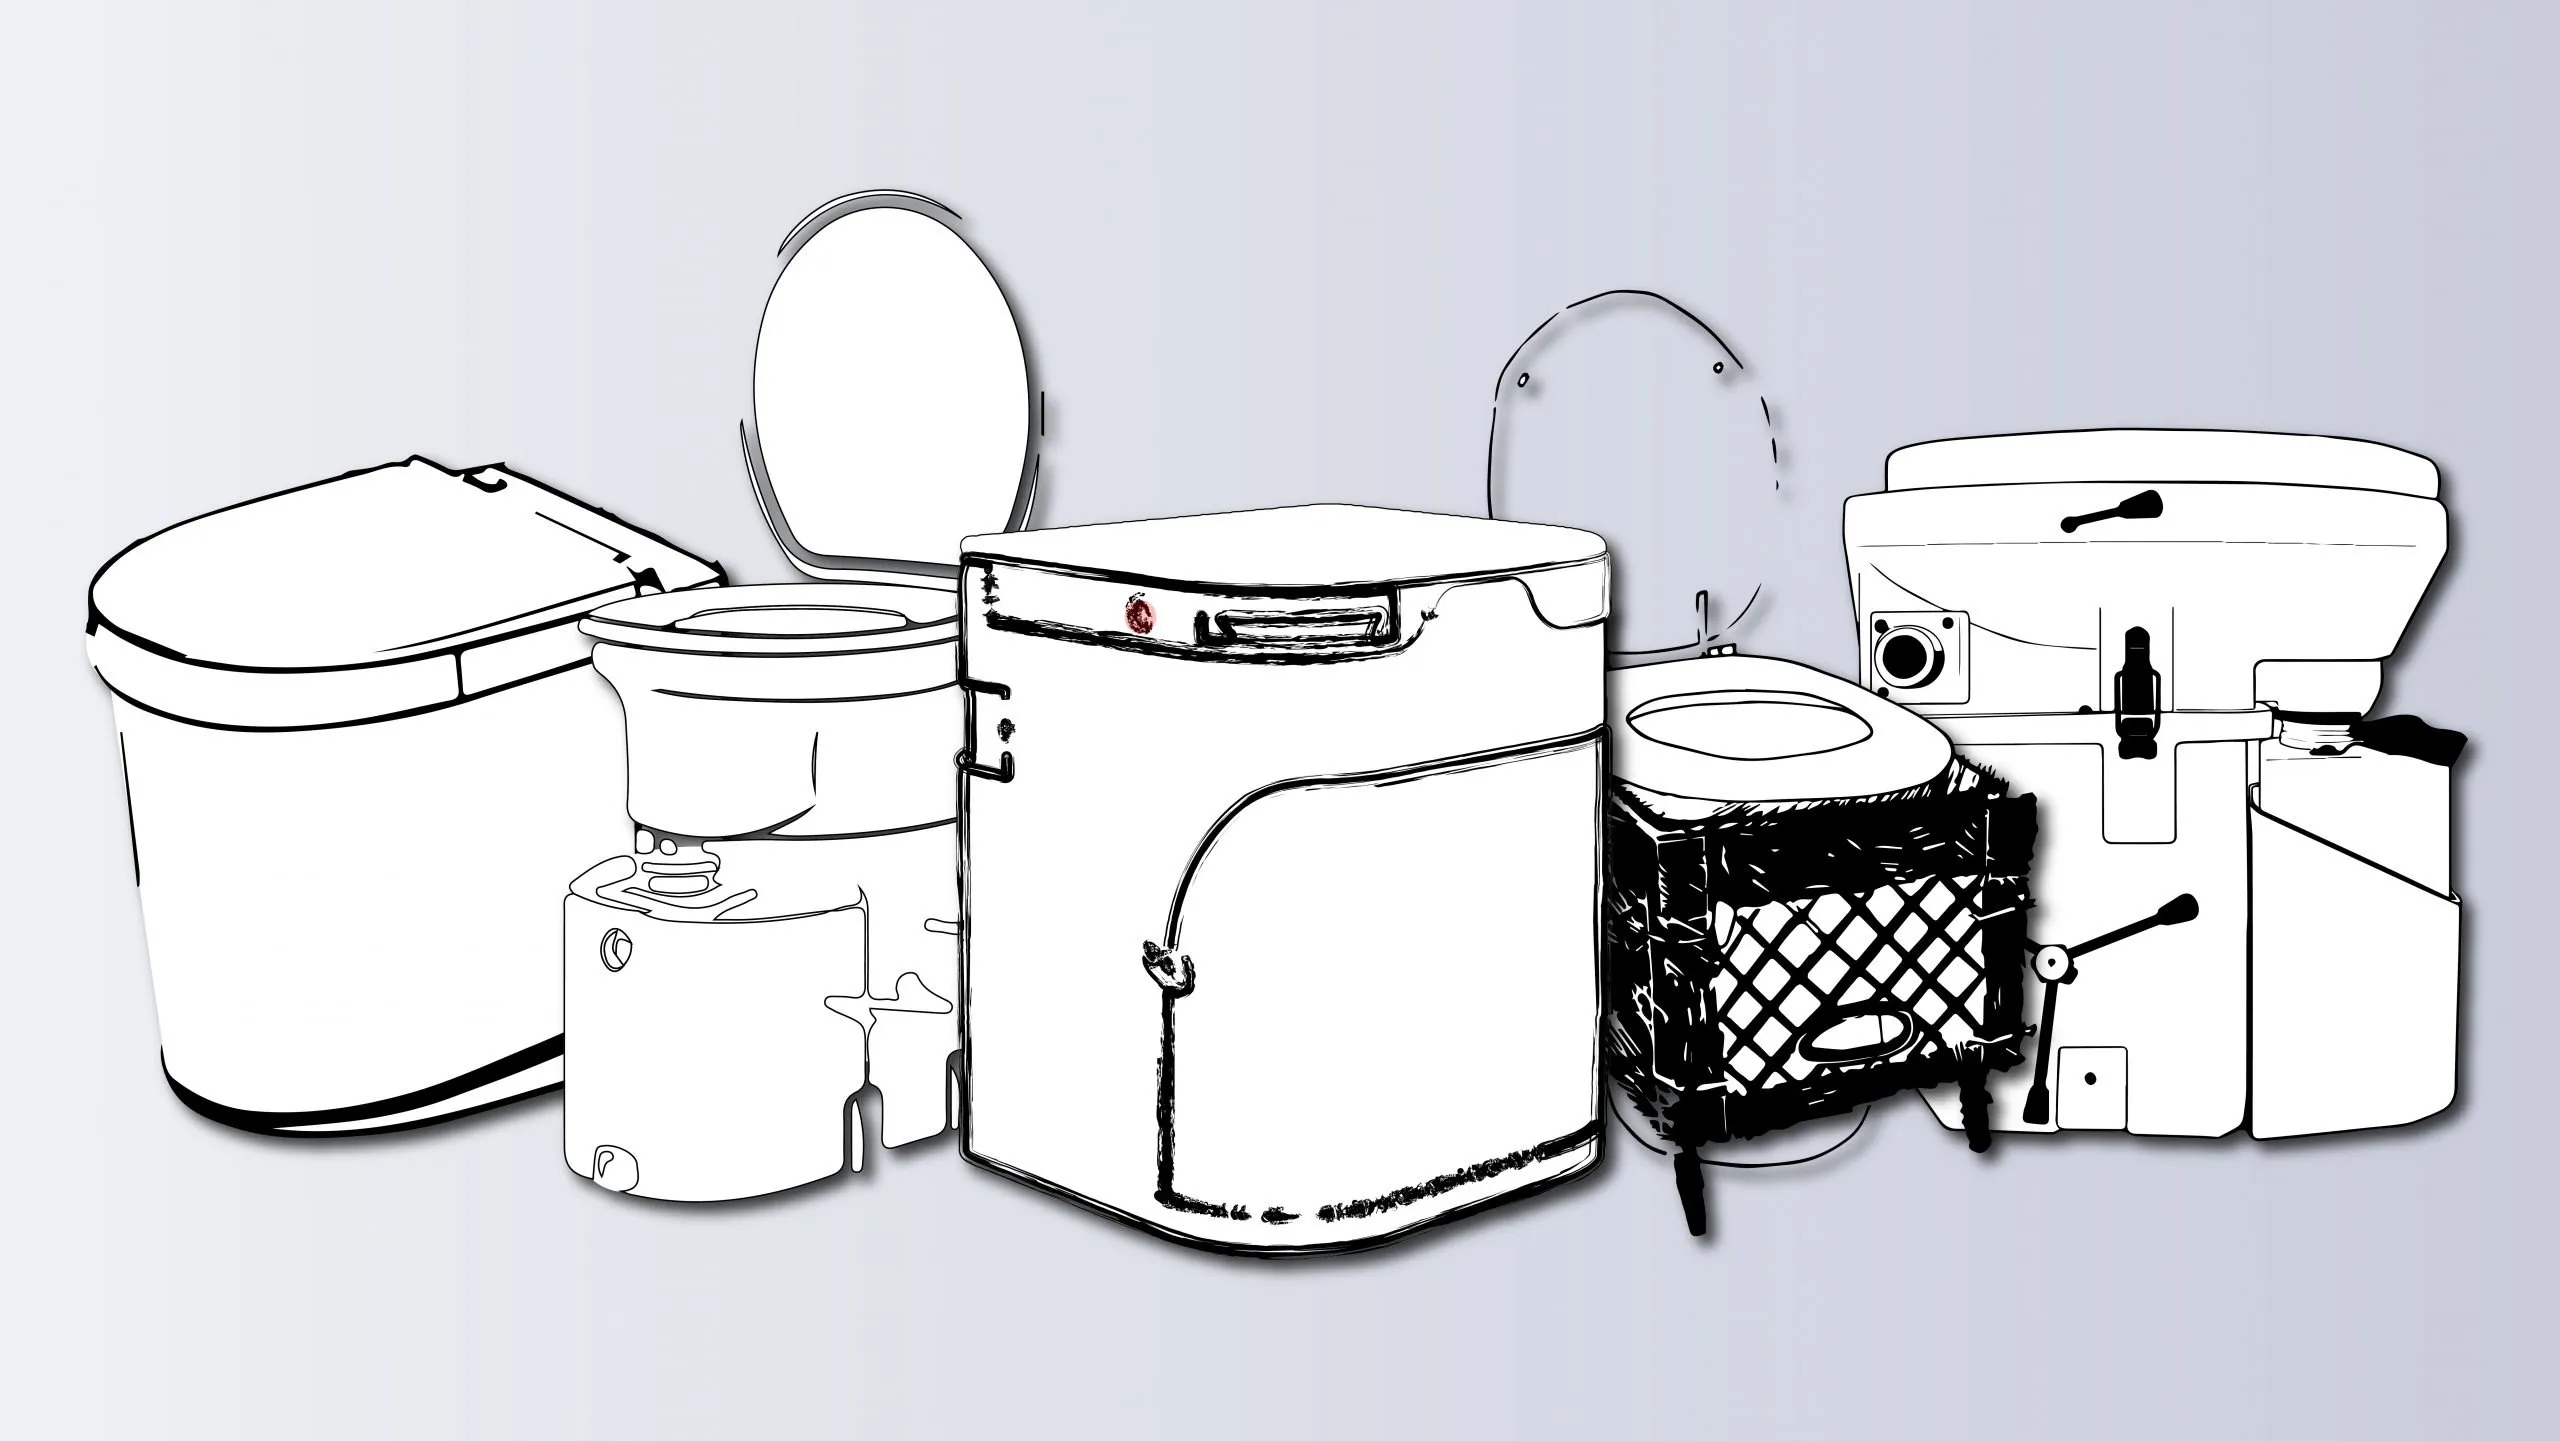 Illustration showing different types of composting toilets for RVs